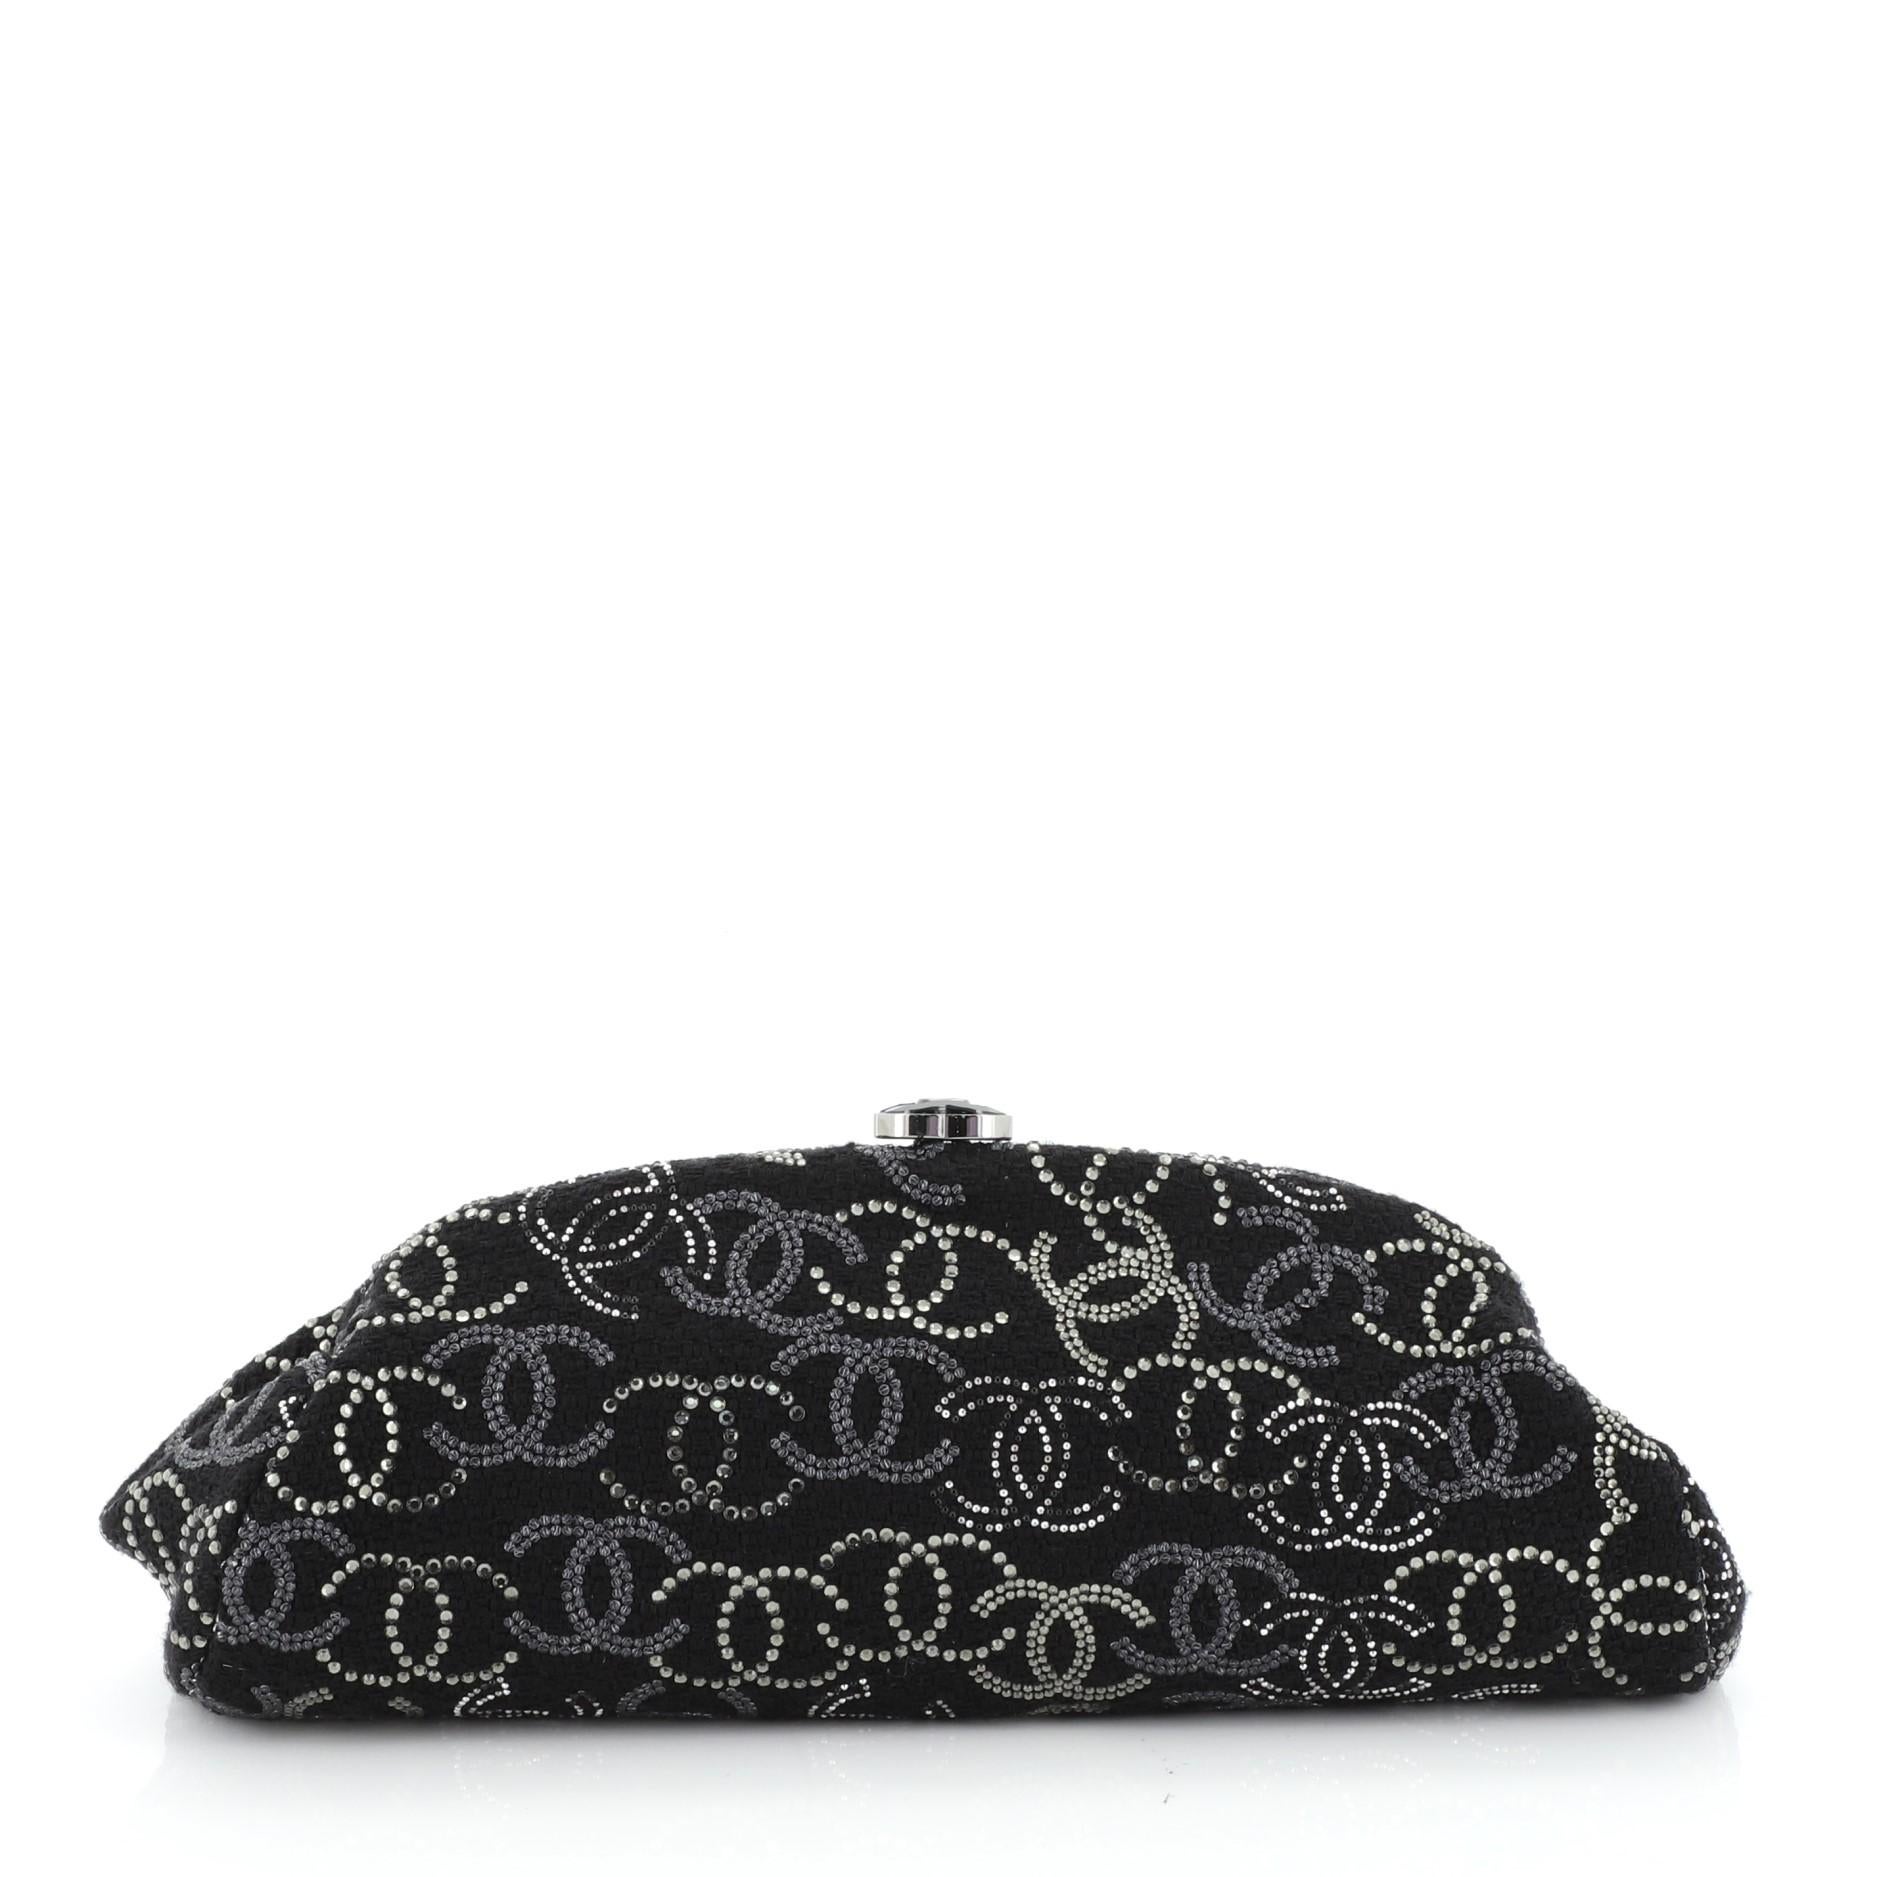 Black Chanel Paris-Shanghai Pudong Clutch Strass Embellished Tweed